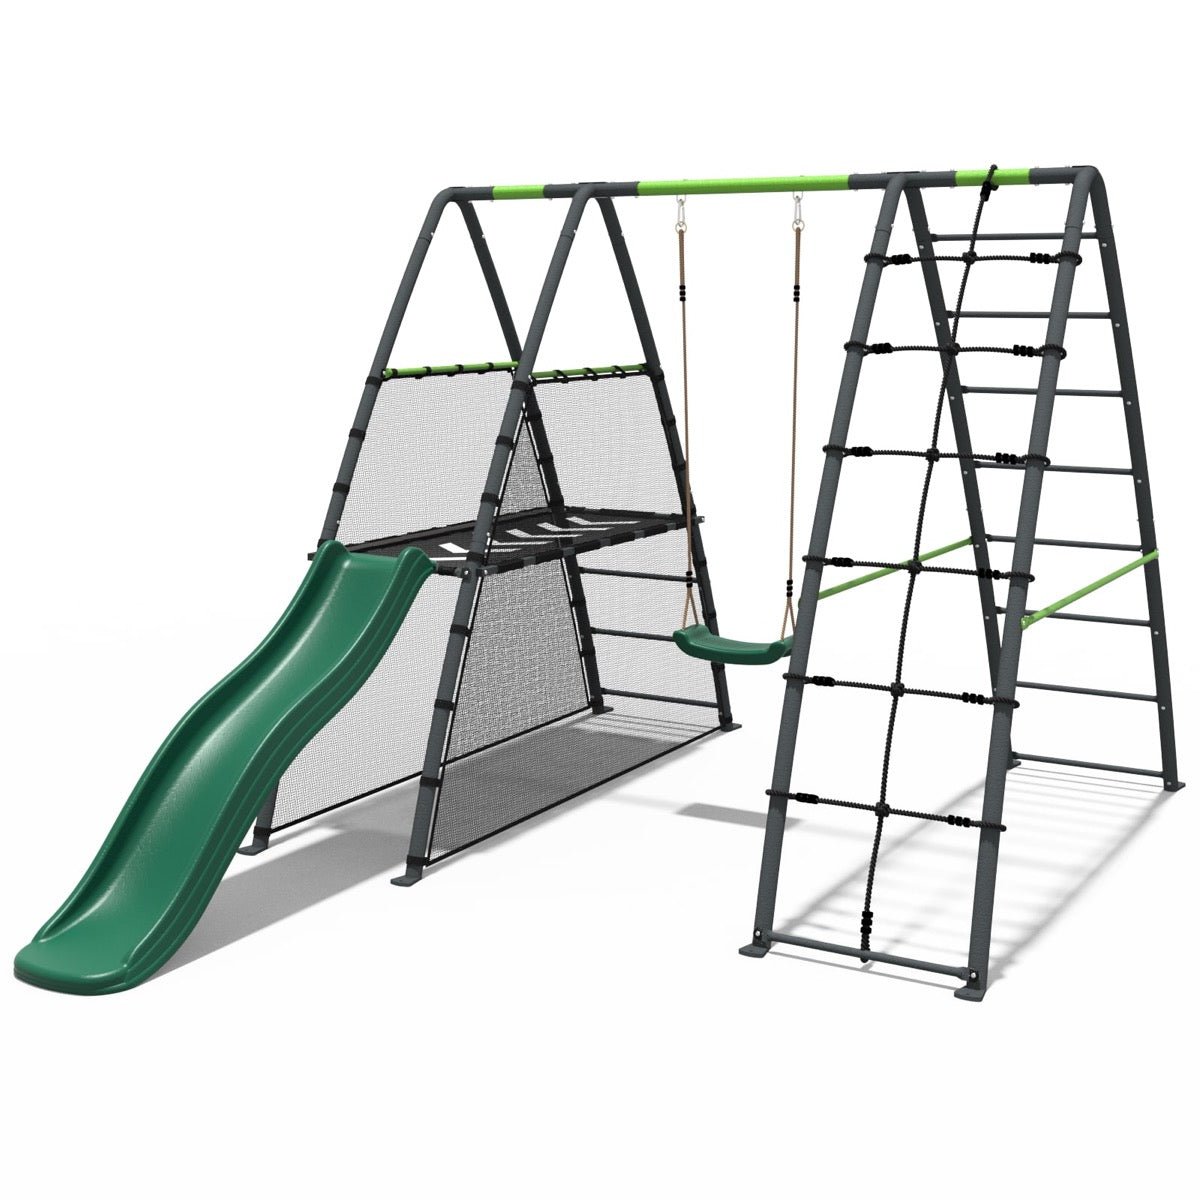 Rebo Steel Series Metal Swing Set + Up and Over wall & 6ft Slide - Single Green